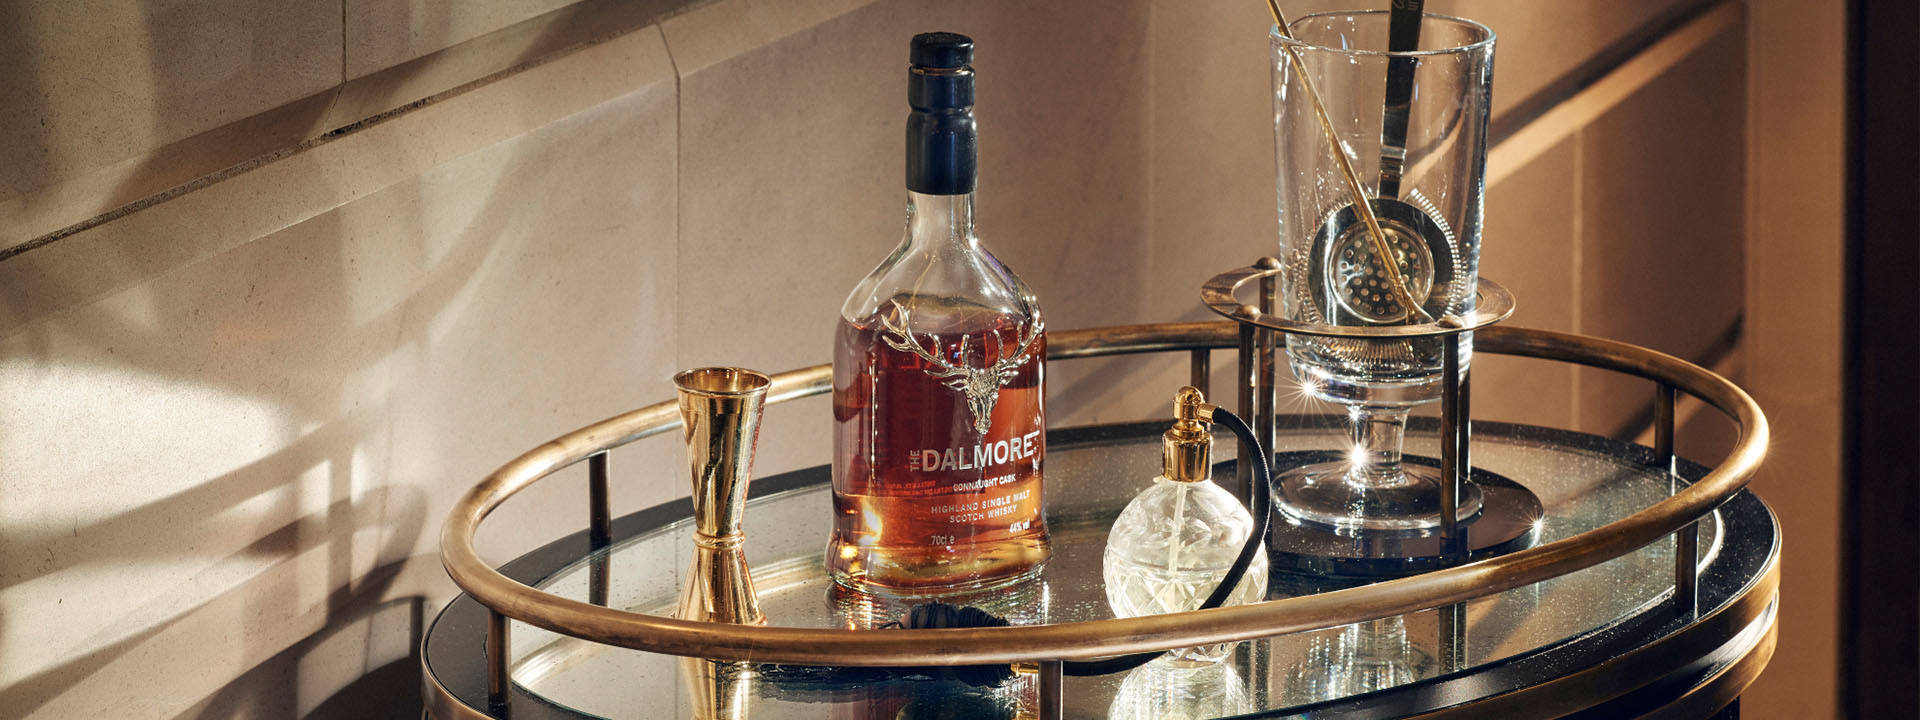 Dalmore scotch whisky on tray in the Champagne Room at The Connaught